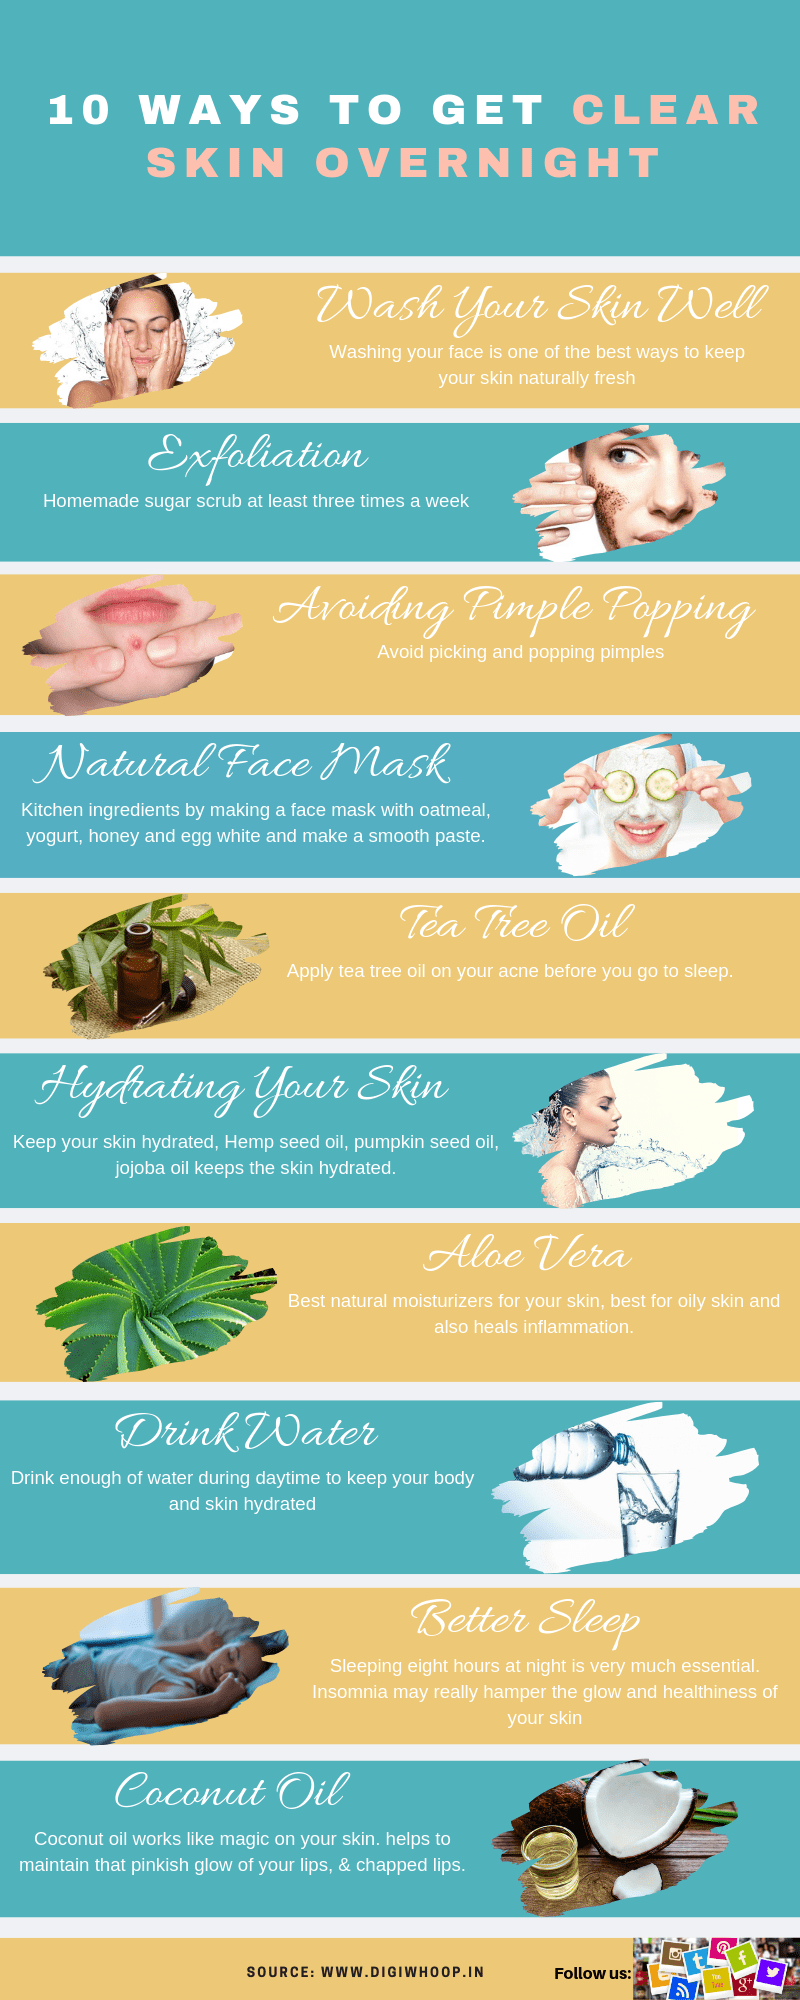 How to Get Clear Skin Overnight Infographic